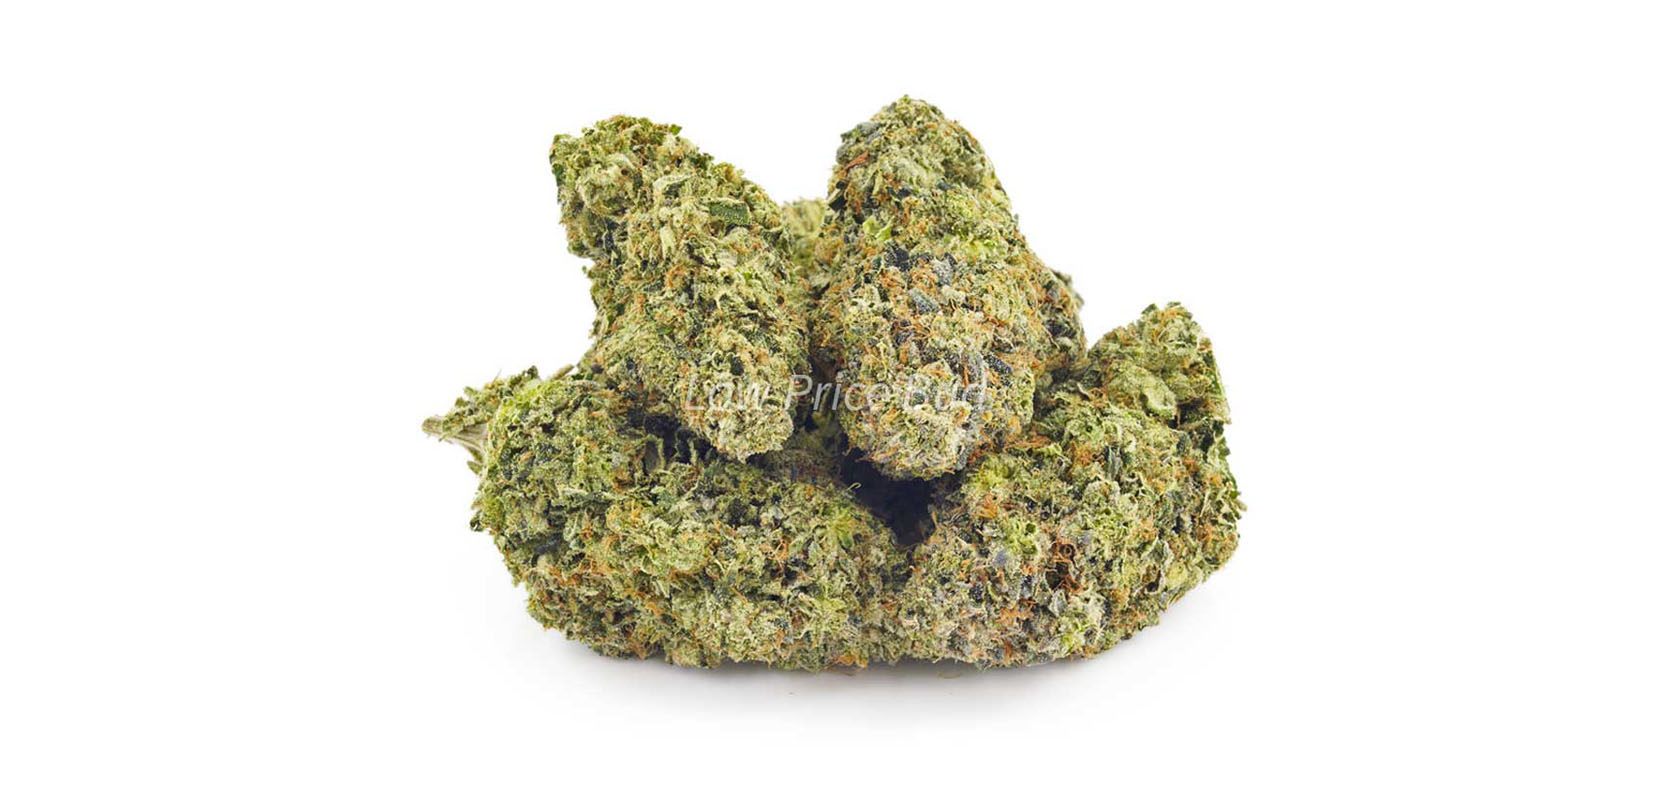 Supreme Gas Mask weed omnline Canada from BC Cannabis dispensary and mail order marijuana online dispensary Low Price Bud. BC Buds online and weed store.